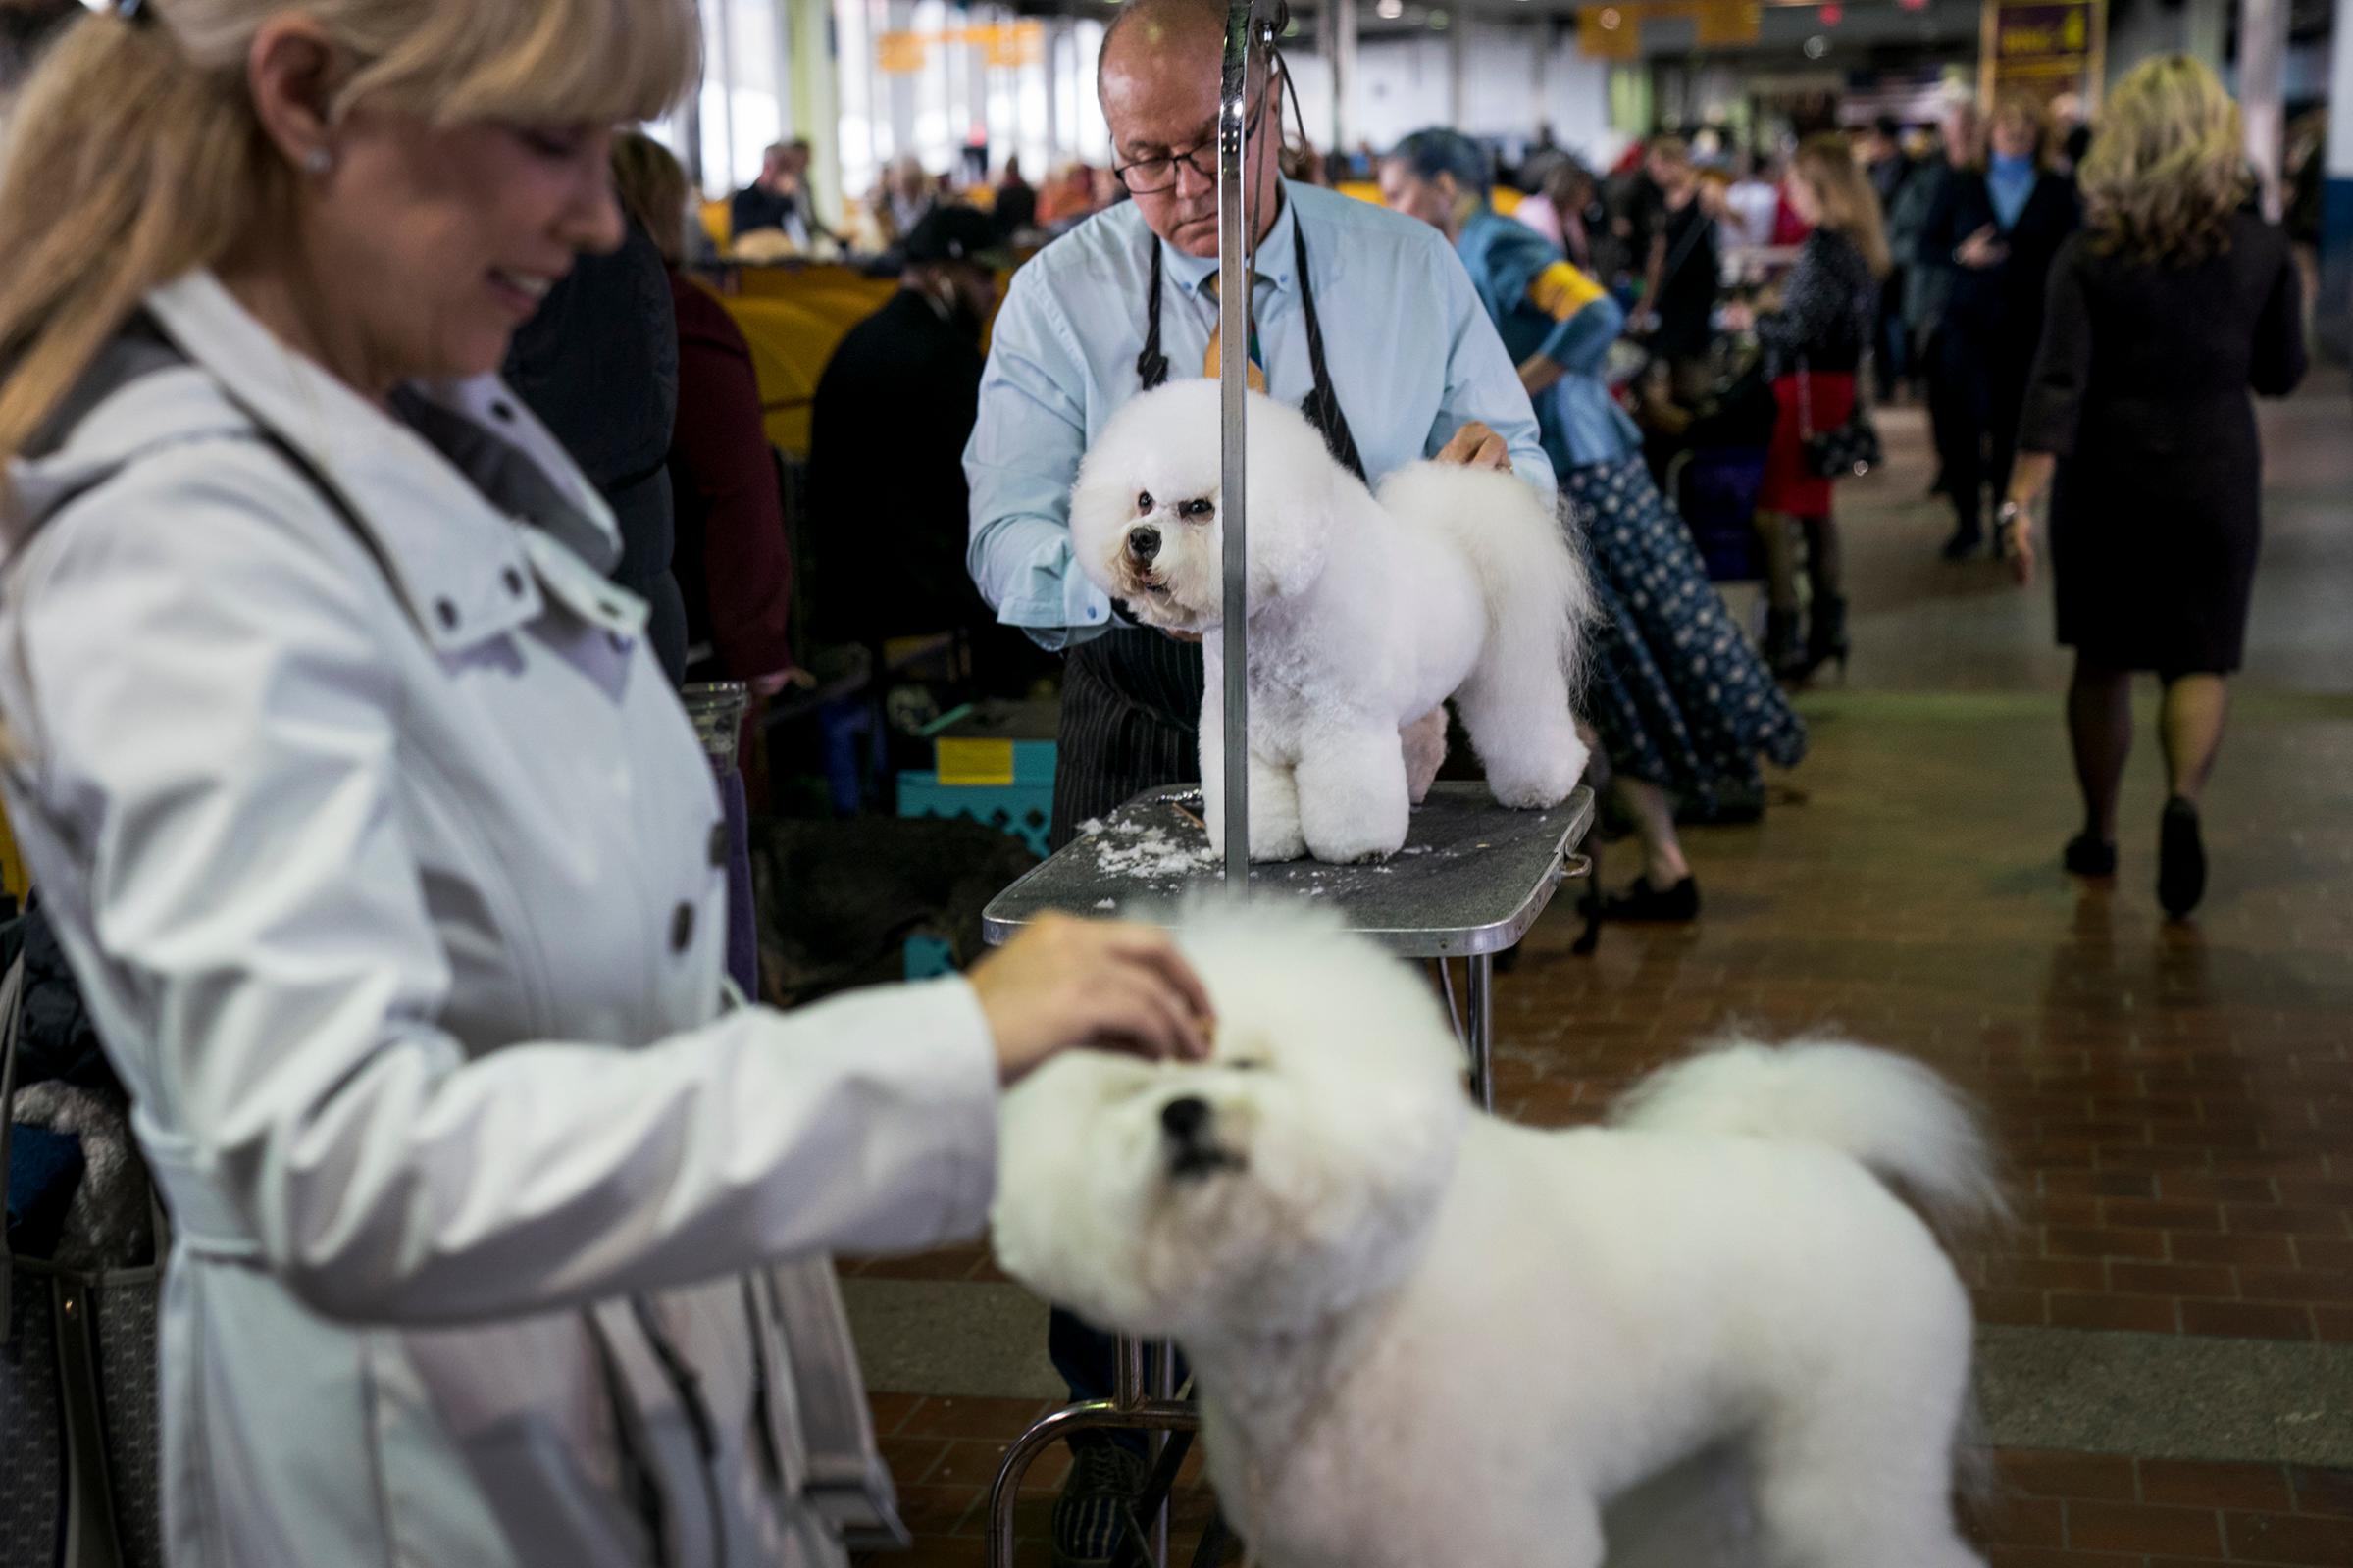 Bichon Frise dogs get groomed backstage at the 142nd Westminster Kennel Club Dog Show at The Piers in New York on Feb. 12, 2018.